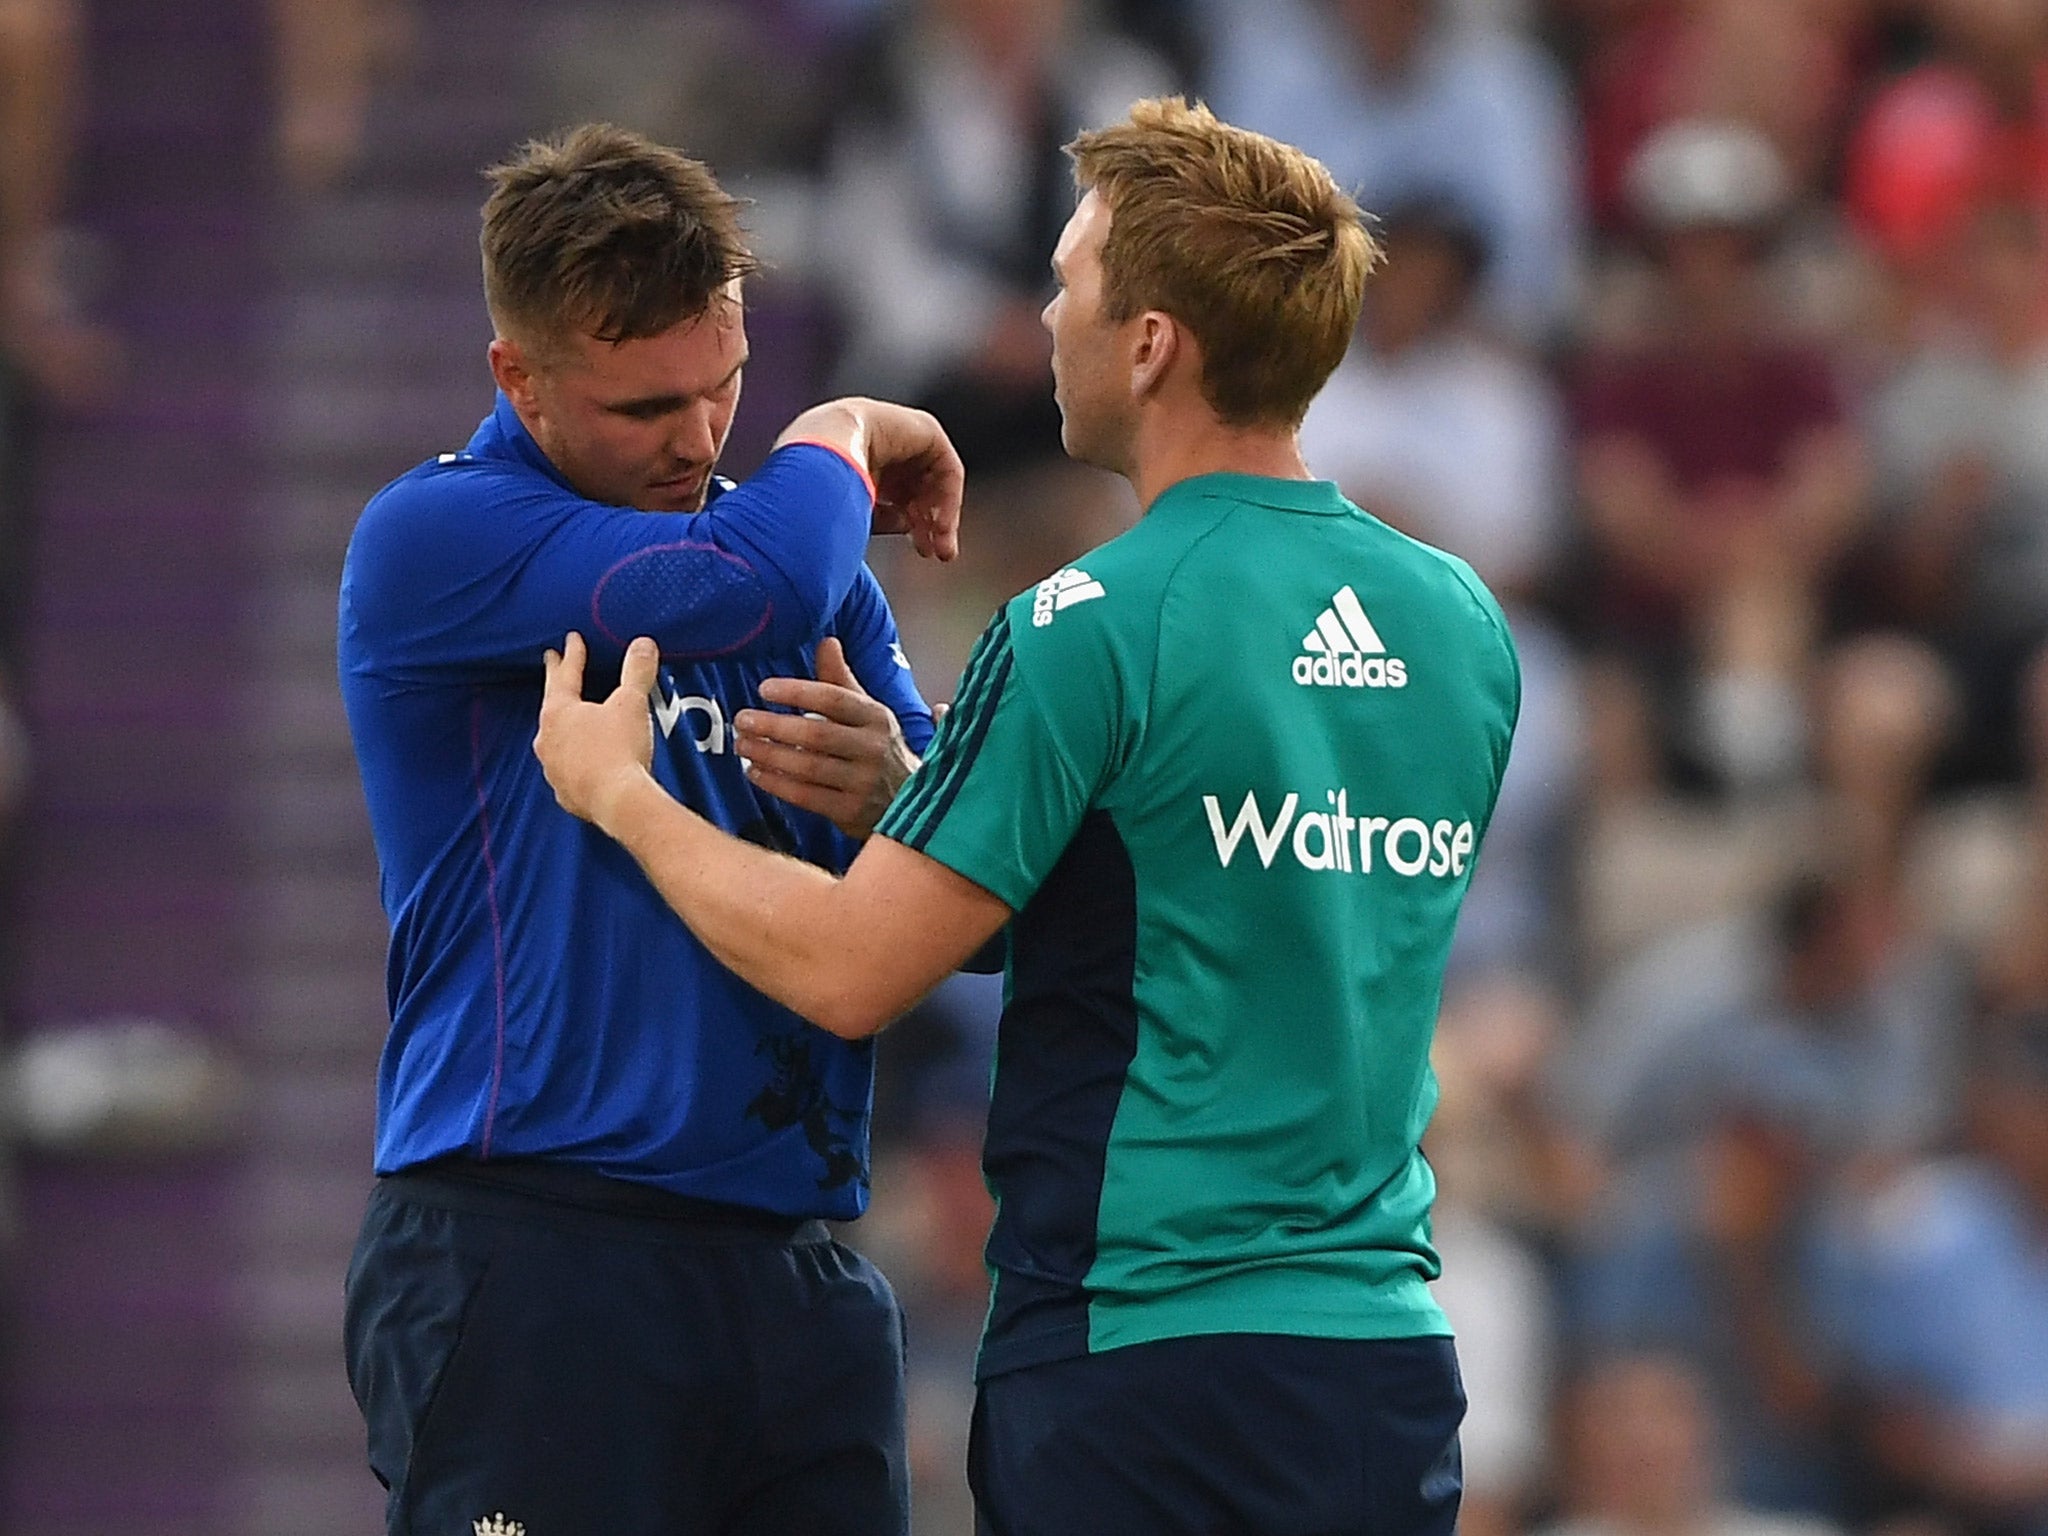 Jason Roy needed treatment after suffering from dizzying